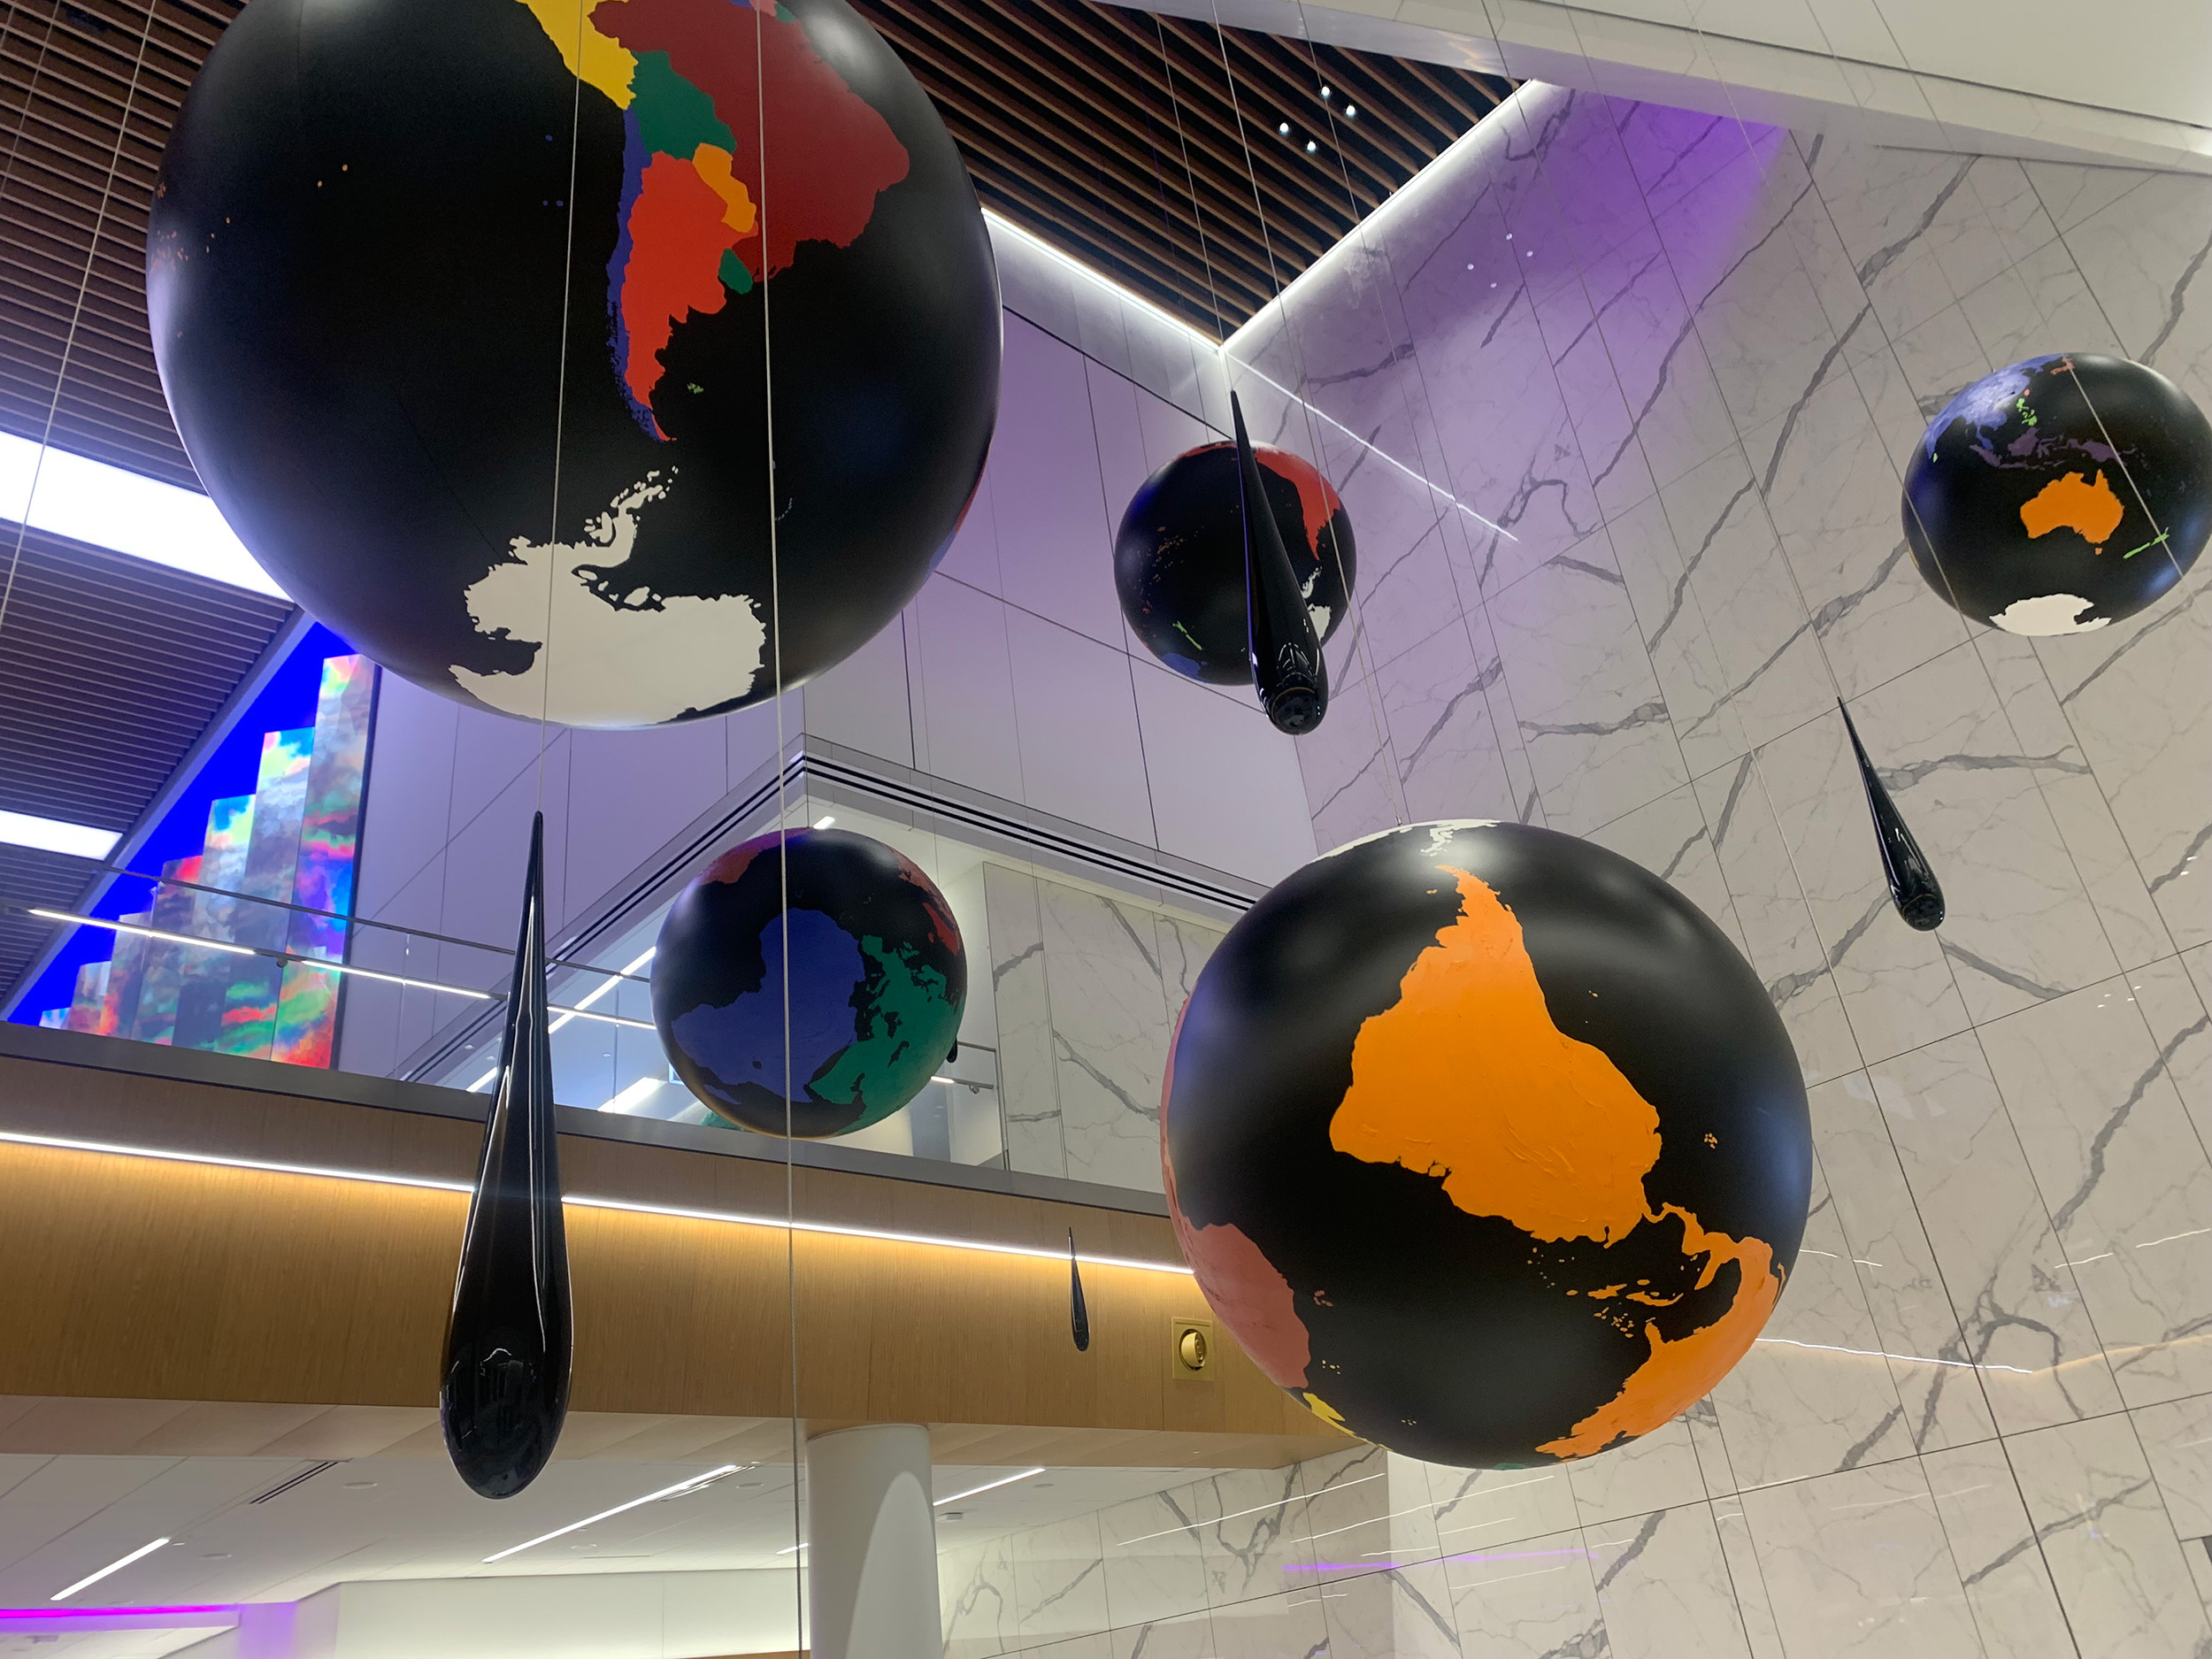 A video thumbnail with a centered, black “press play” symbol in a green rounded off square. The thumbnail is of four black starlight globes in different orientations and black droplets hanging from a museum ceiling.